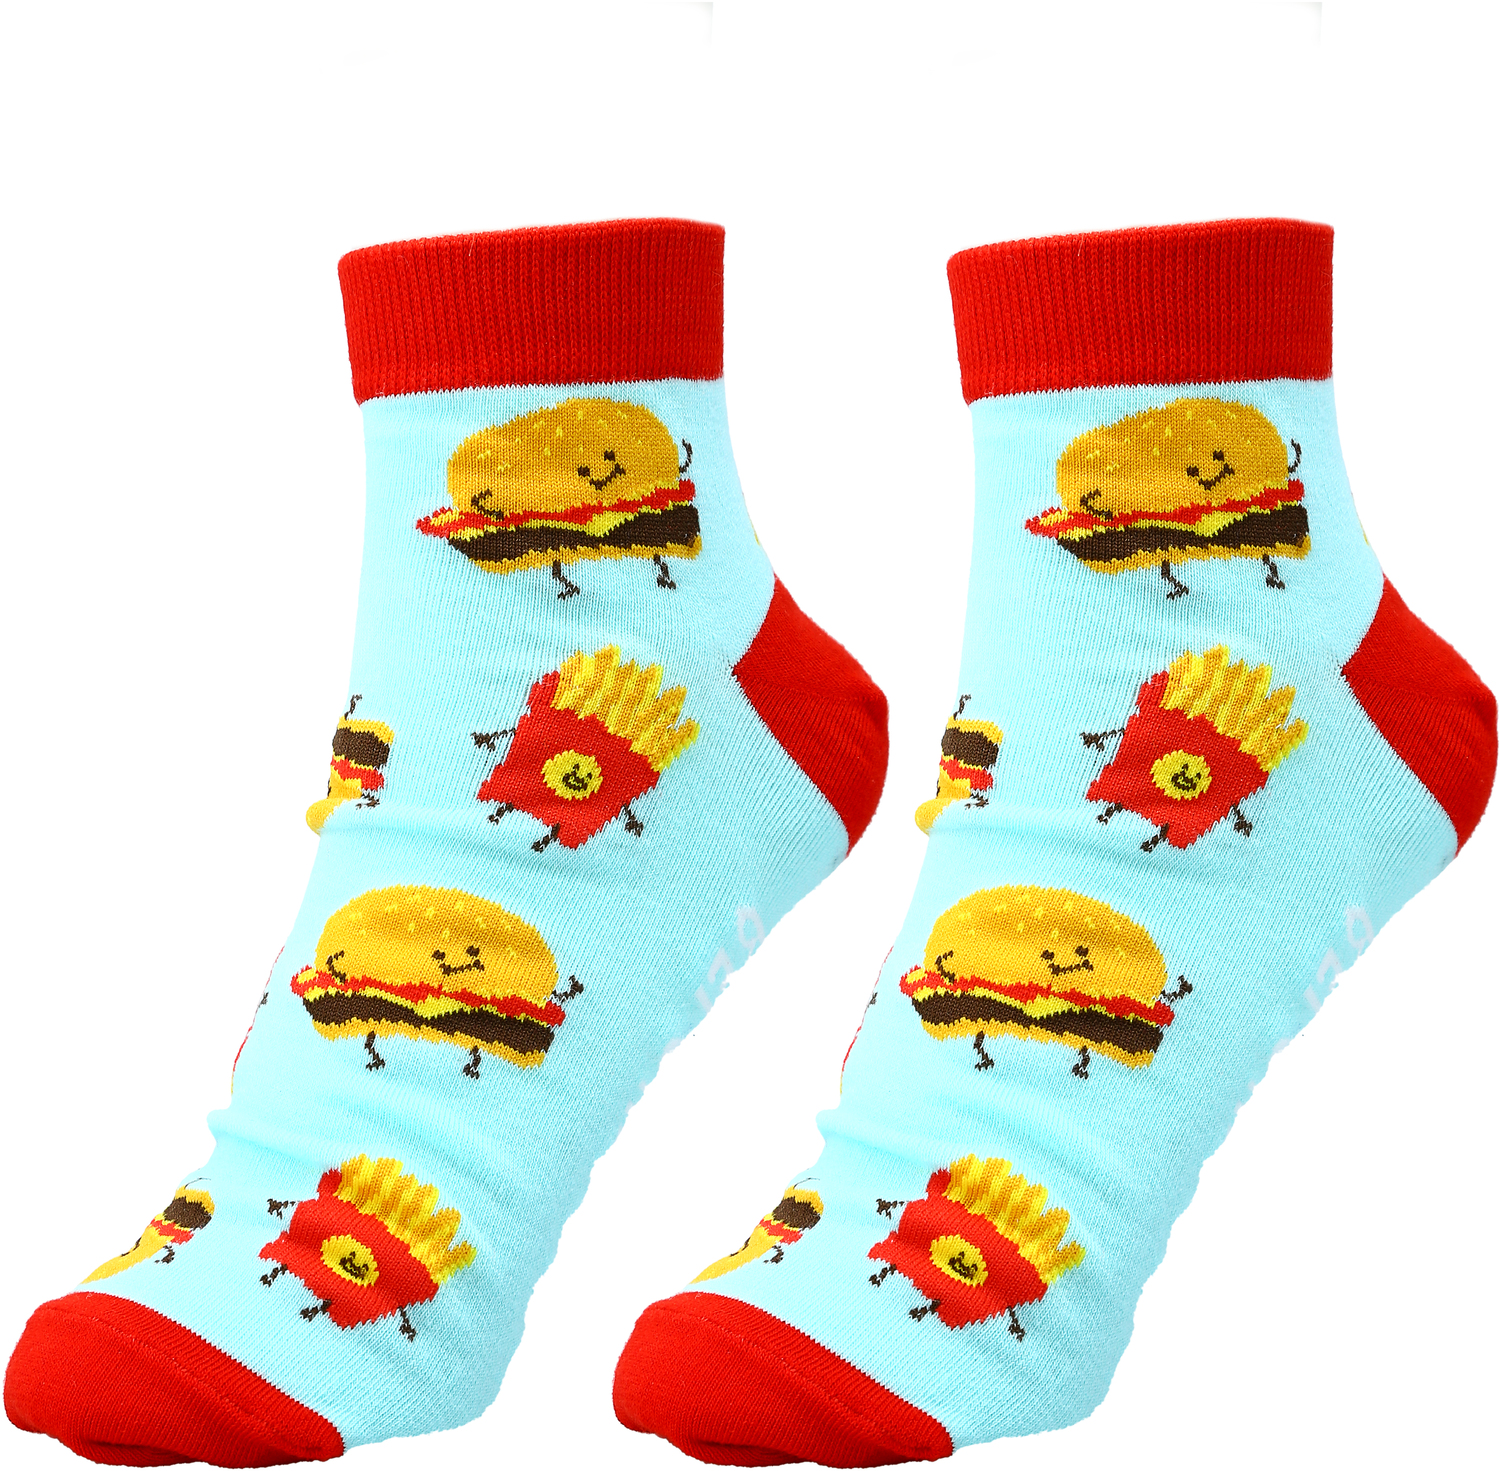 Burger and Fries by Late Night Snacks - Burger and Fries - Cotton Blend Ankle Socks